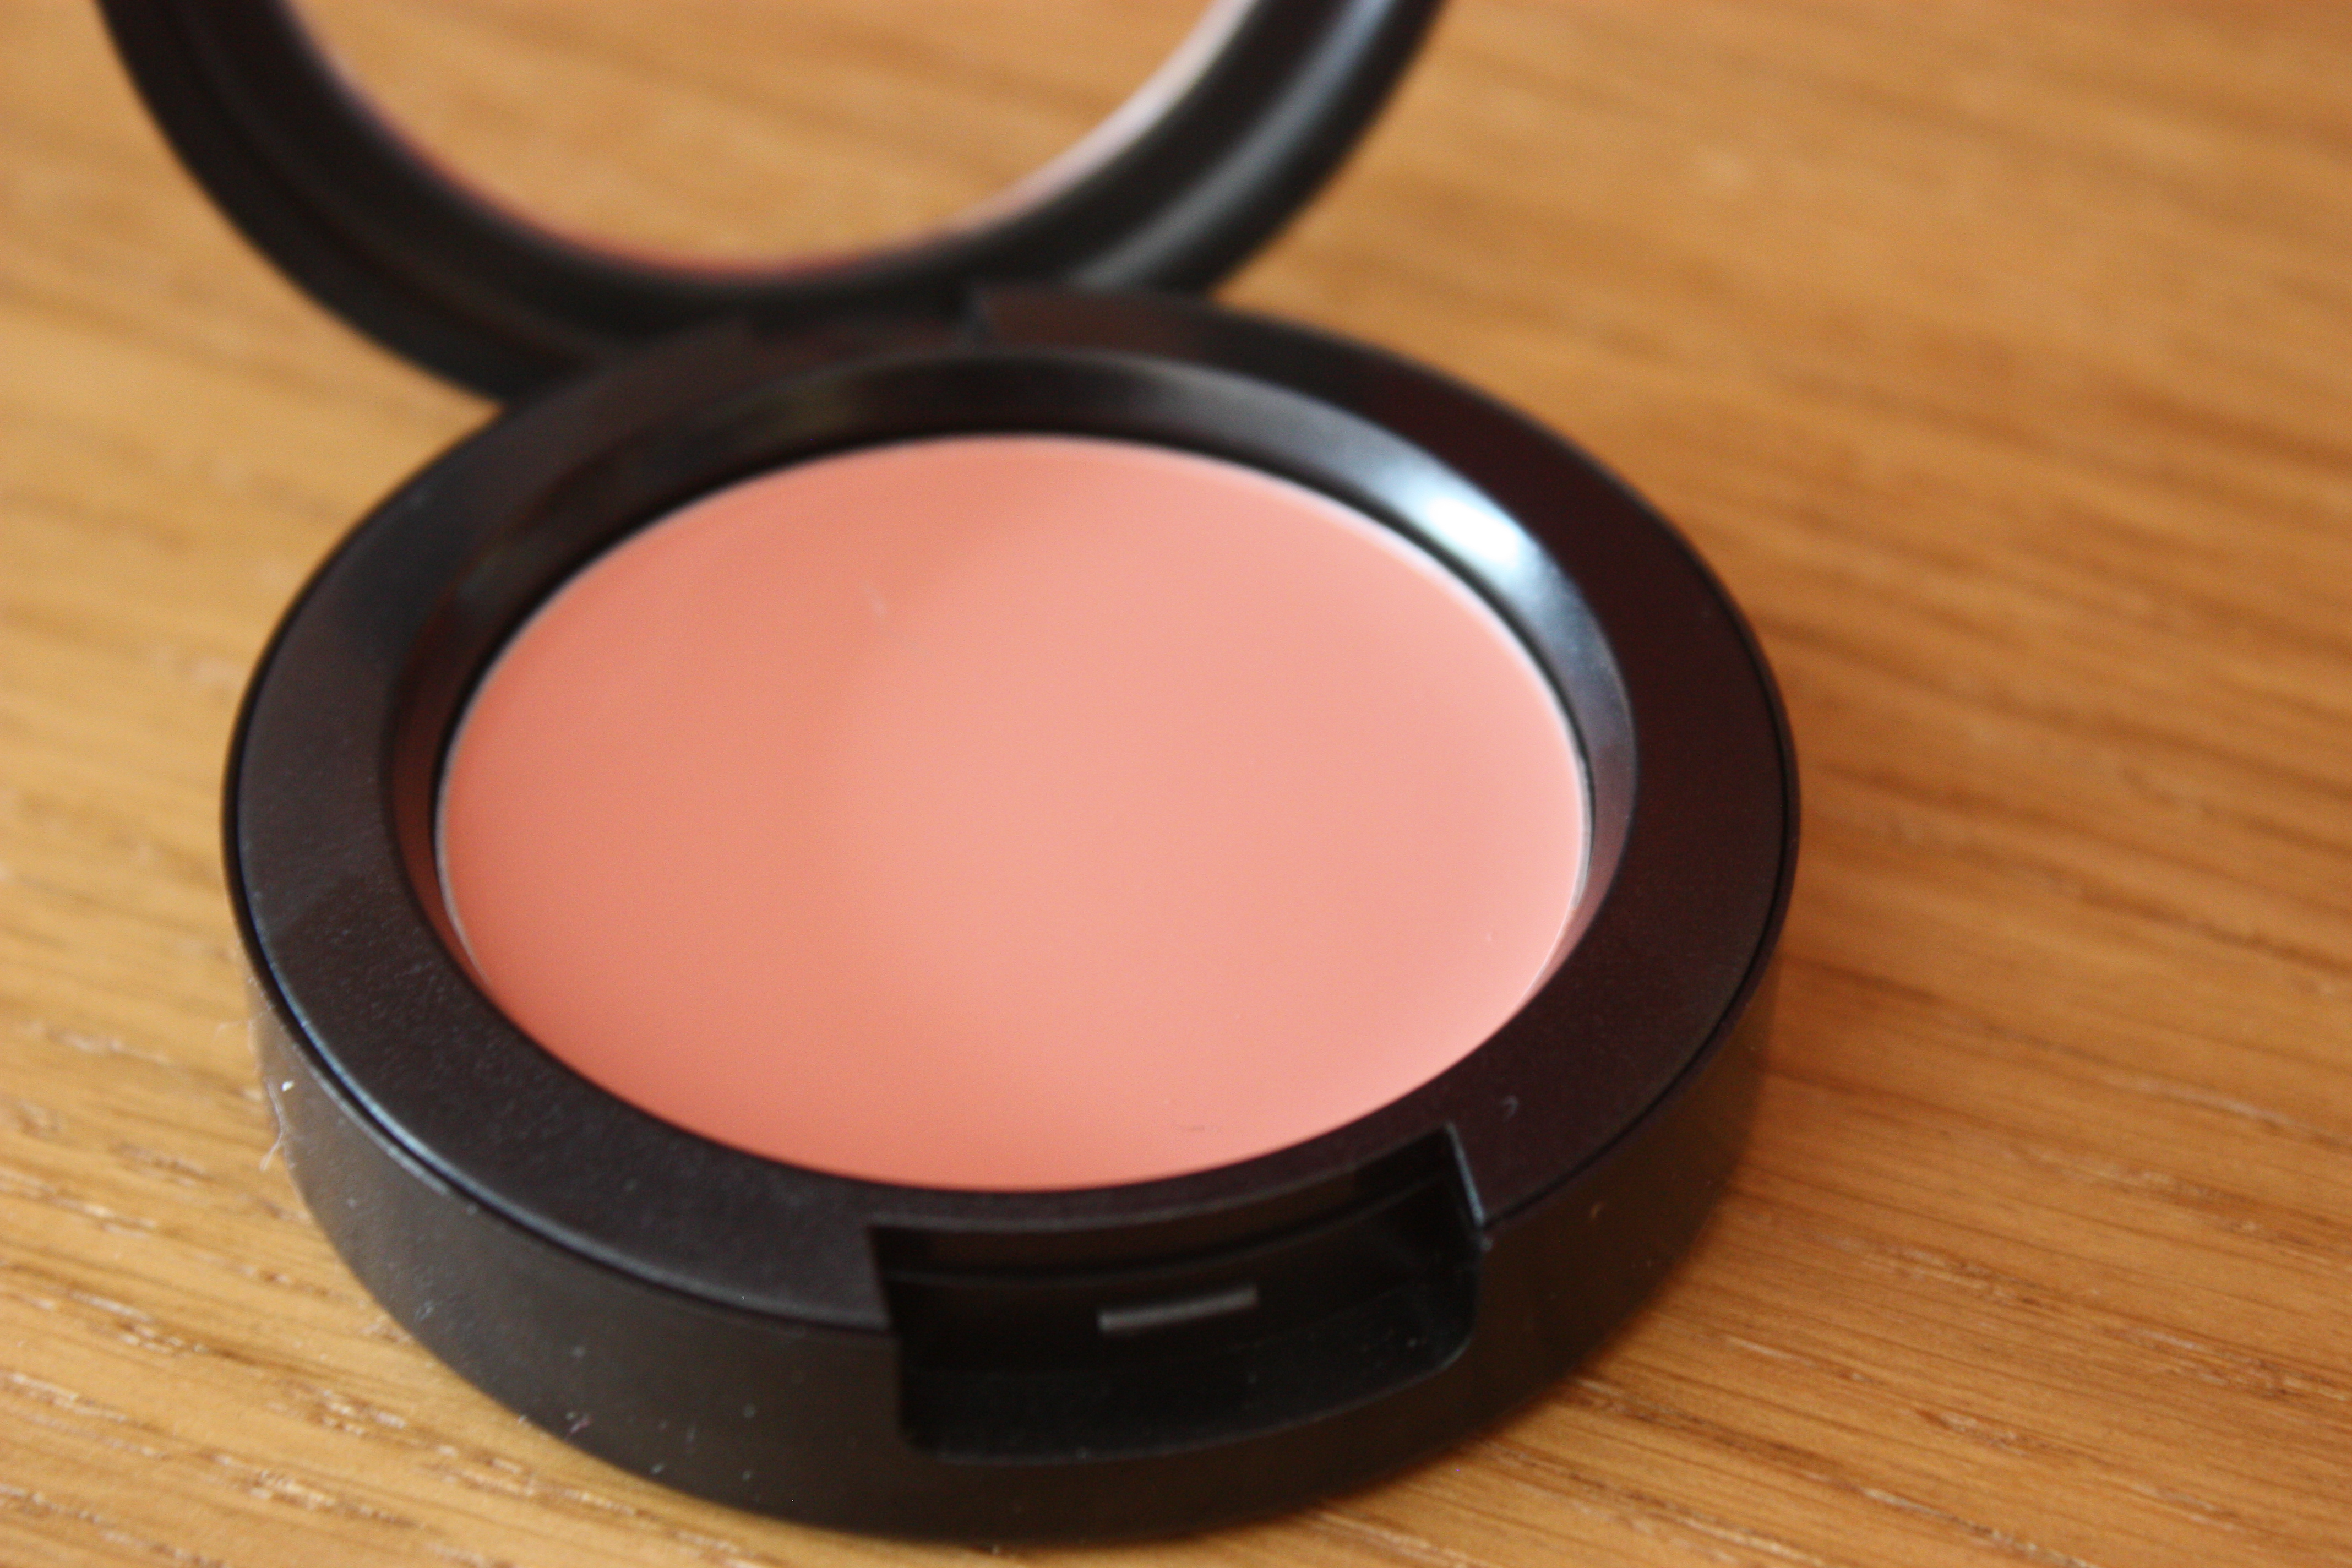 MAC Cremeblend Blush in Ladyblush - which sounds a bit too much like lady bush to me!